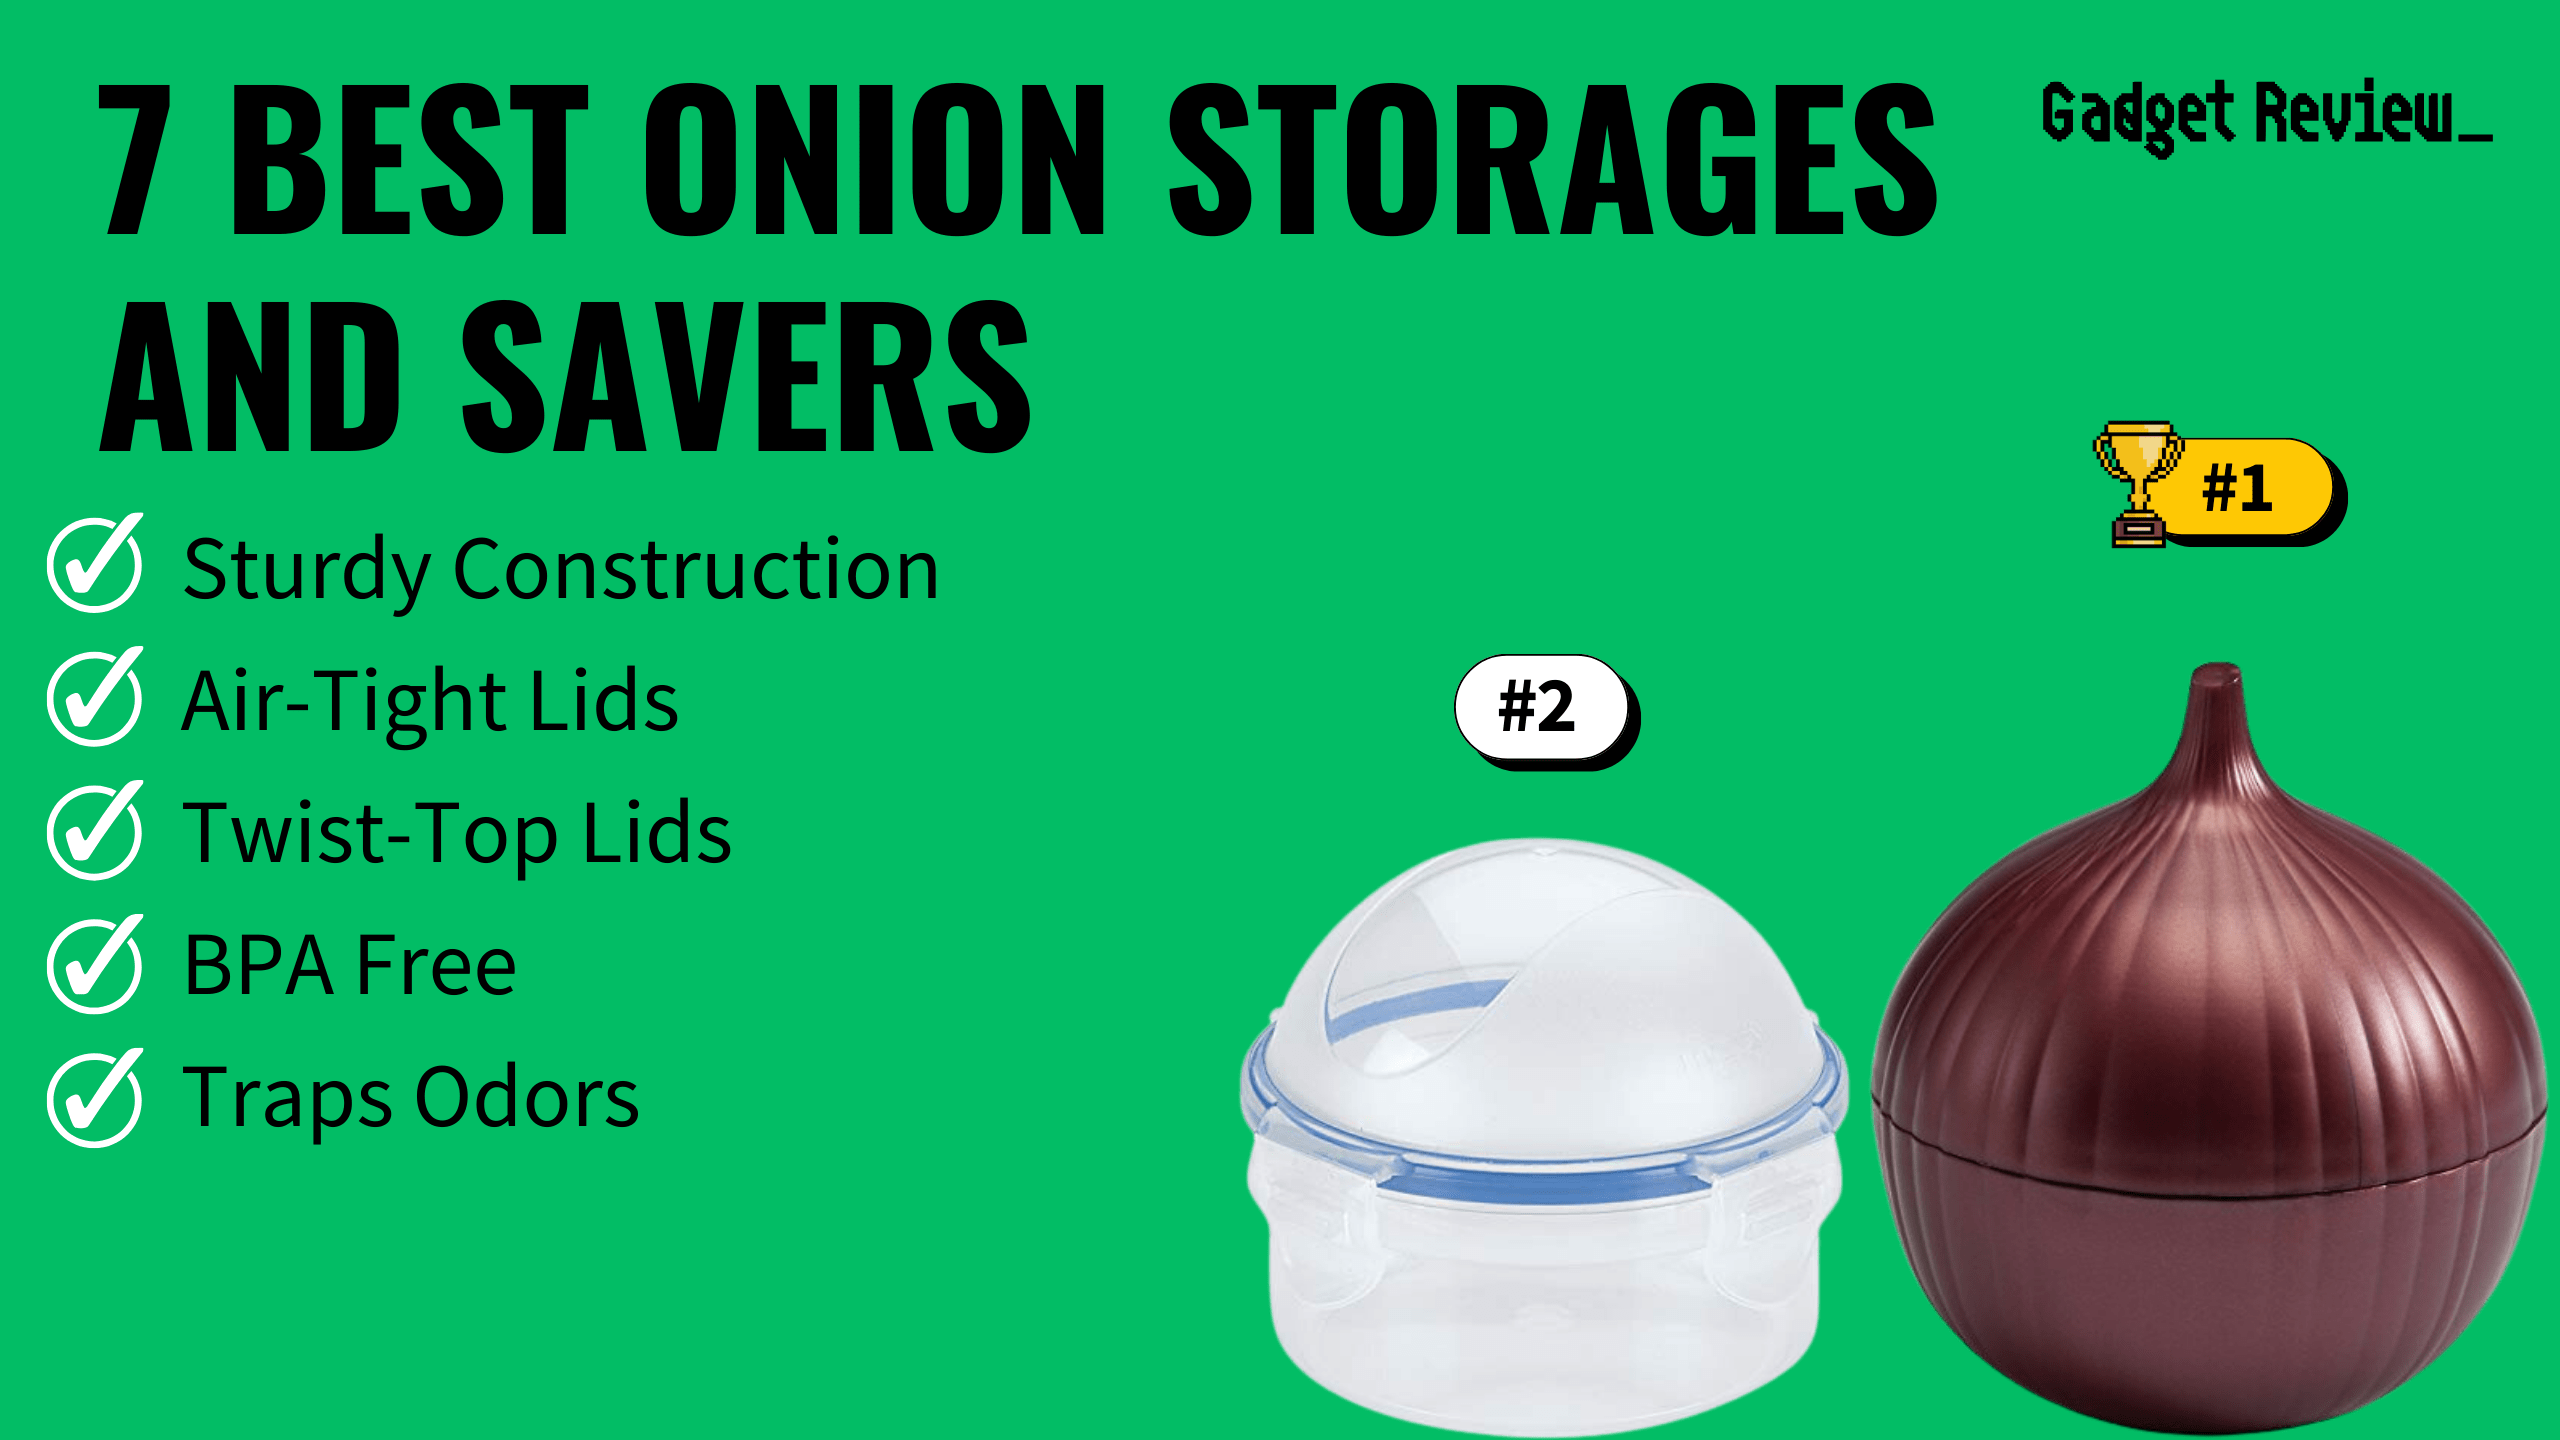 7 Best Onion Storages and Savers